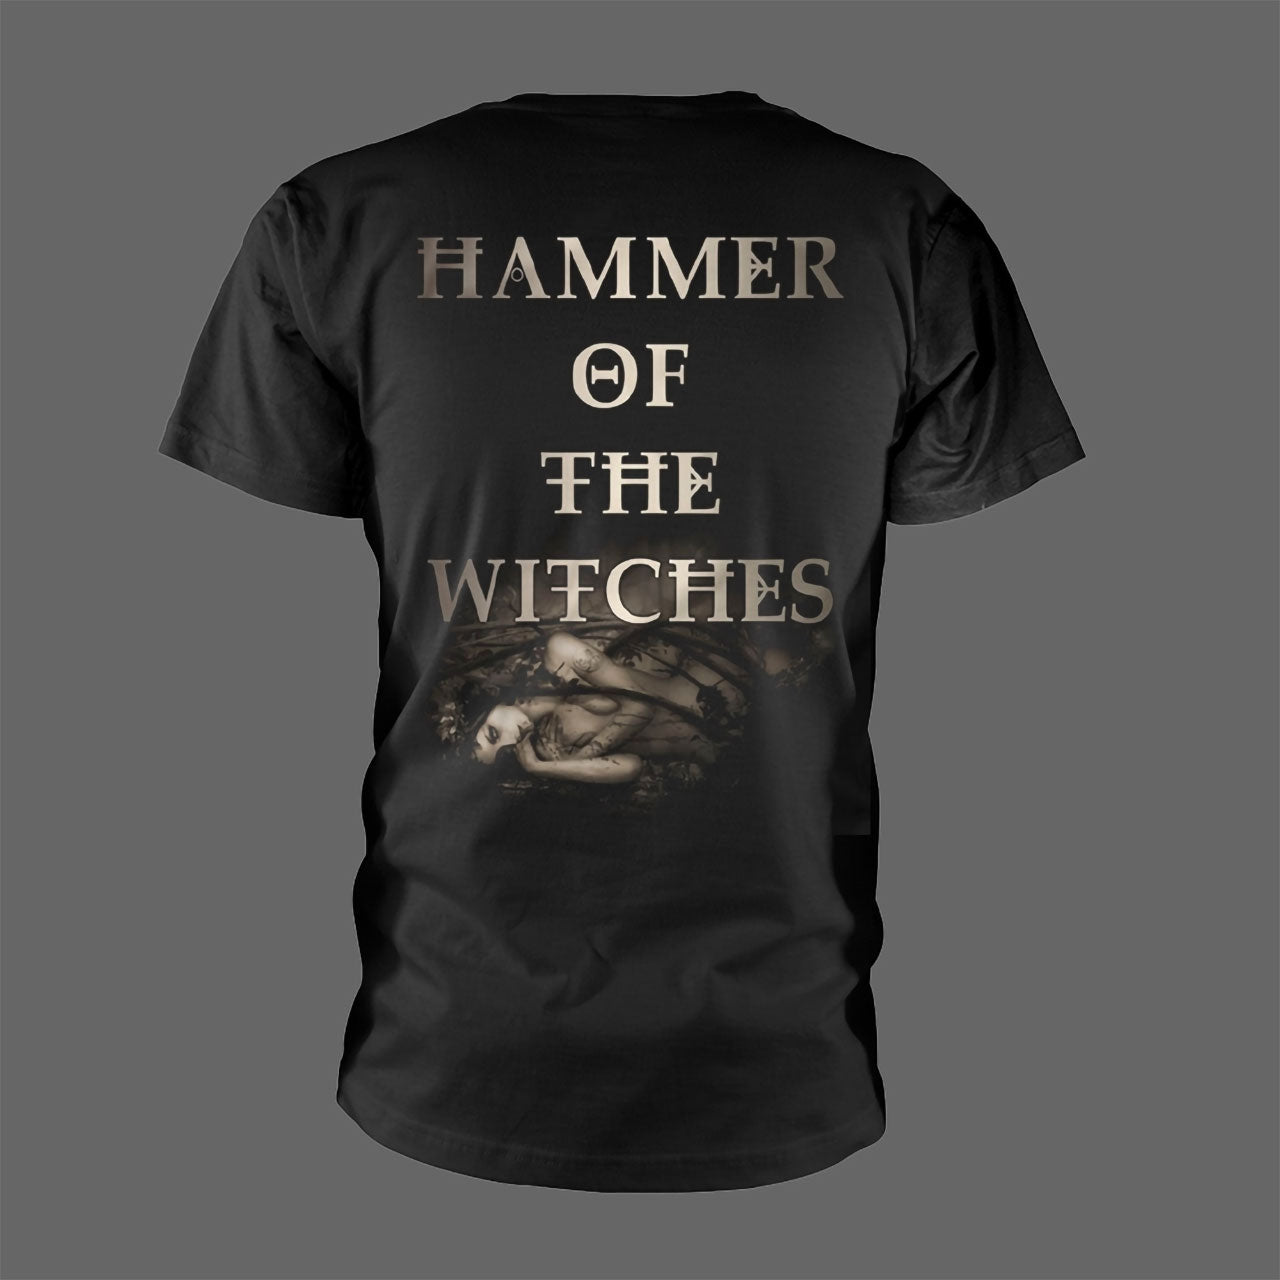 Cradle of Filth - Hammer of the Witches (T-Shirt)